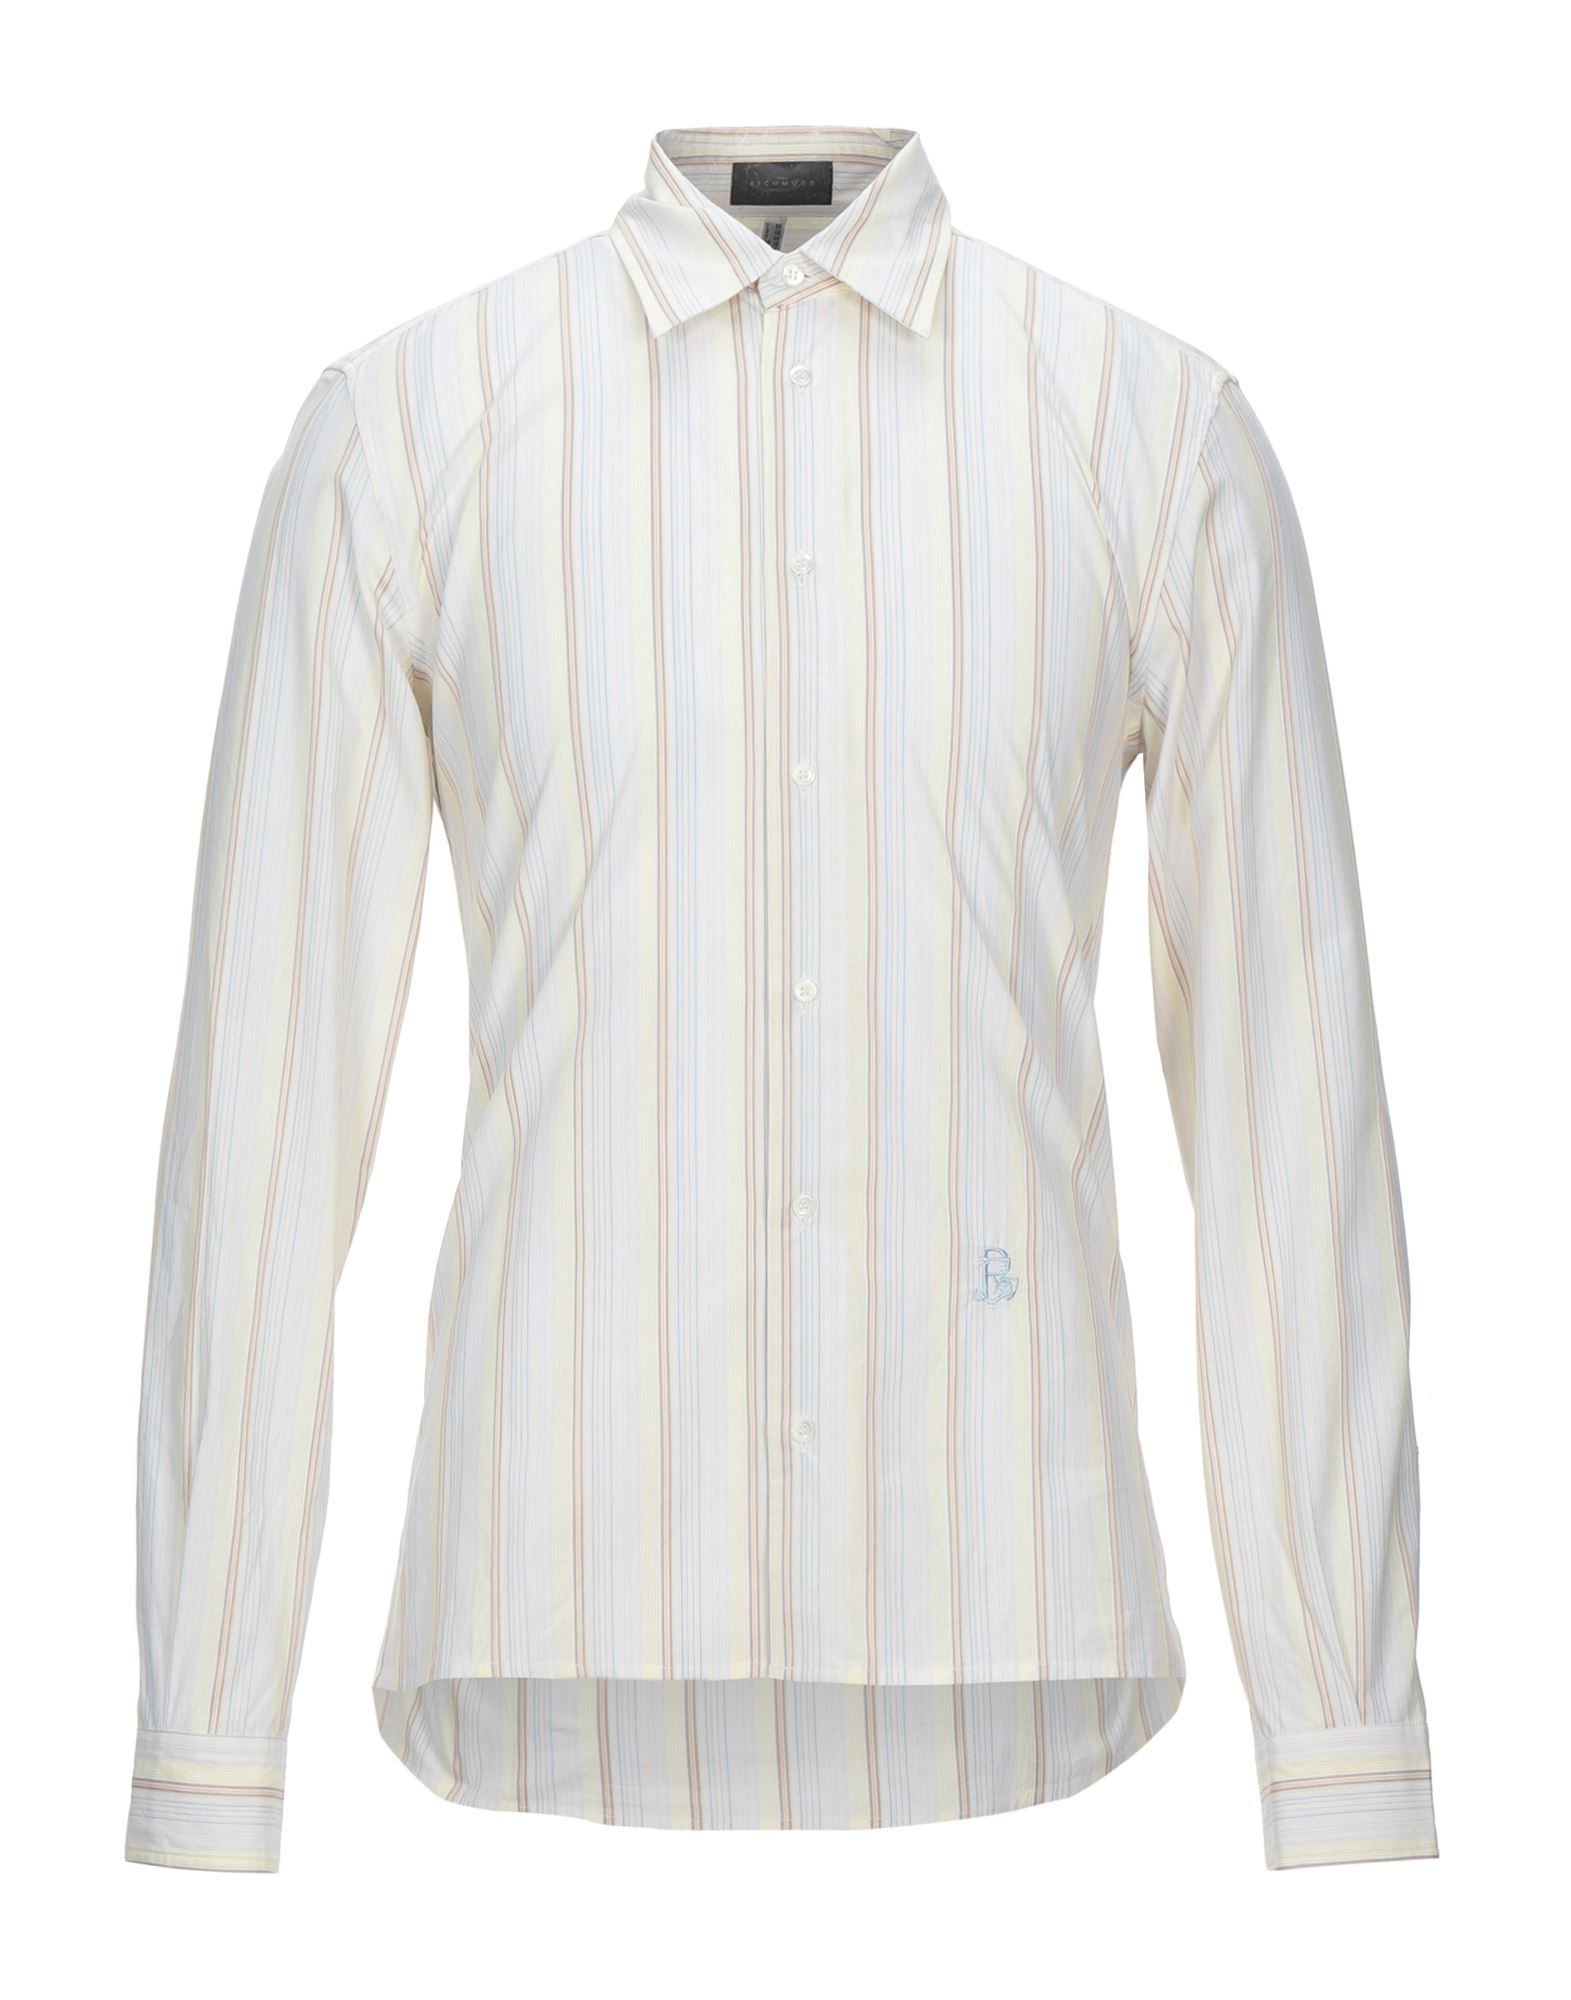 plain weave, embroidered detailing, stripes, front closure, button closing, long sleeves, buttoned cuffs, classic neckline, no pockets, small sized